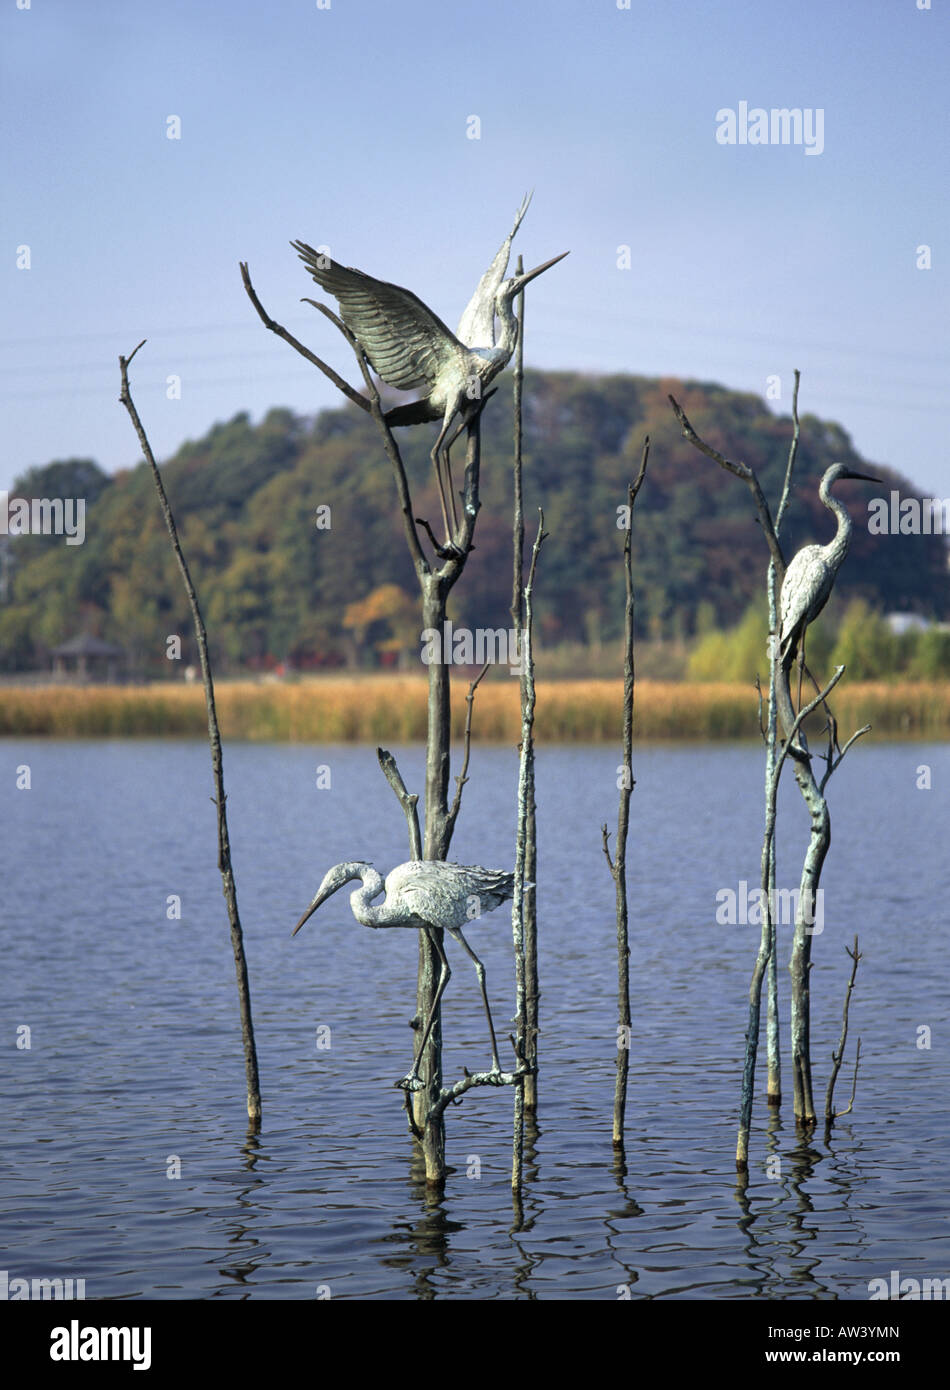 Sculpture of cranes on bare branches  In water  Two perched  One wings outstretched Stock Photo